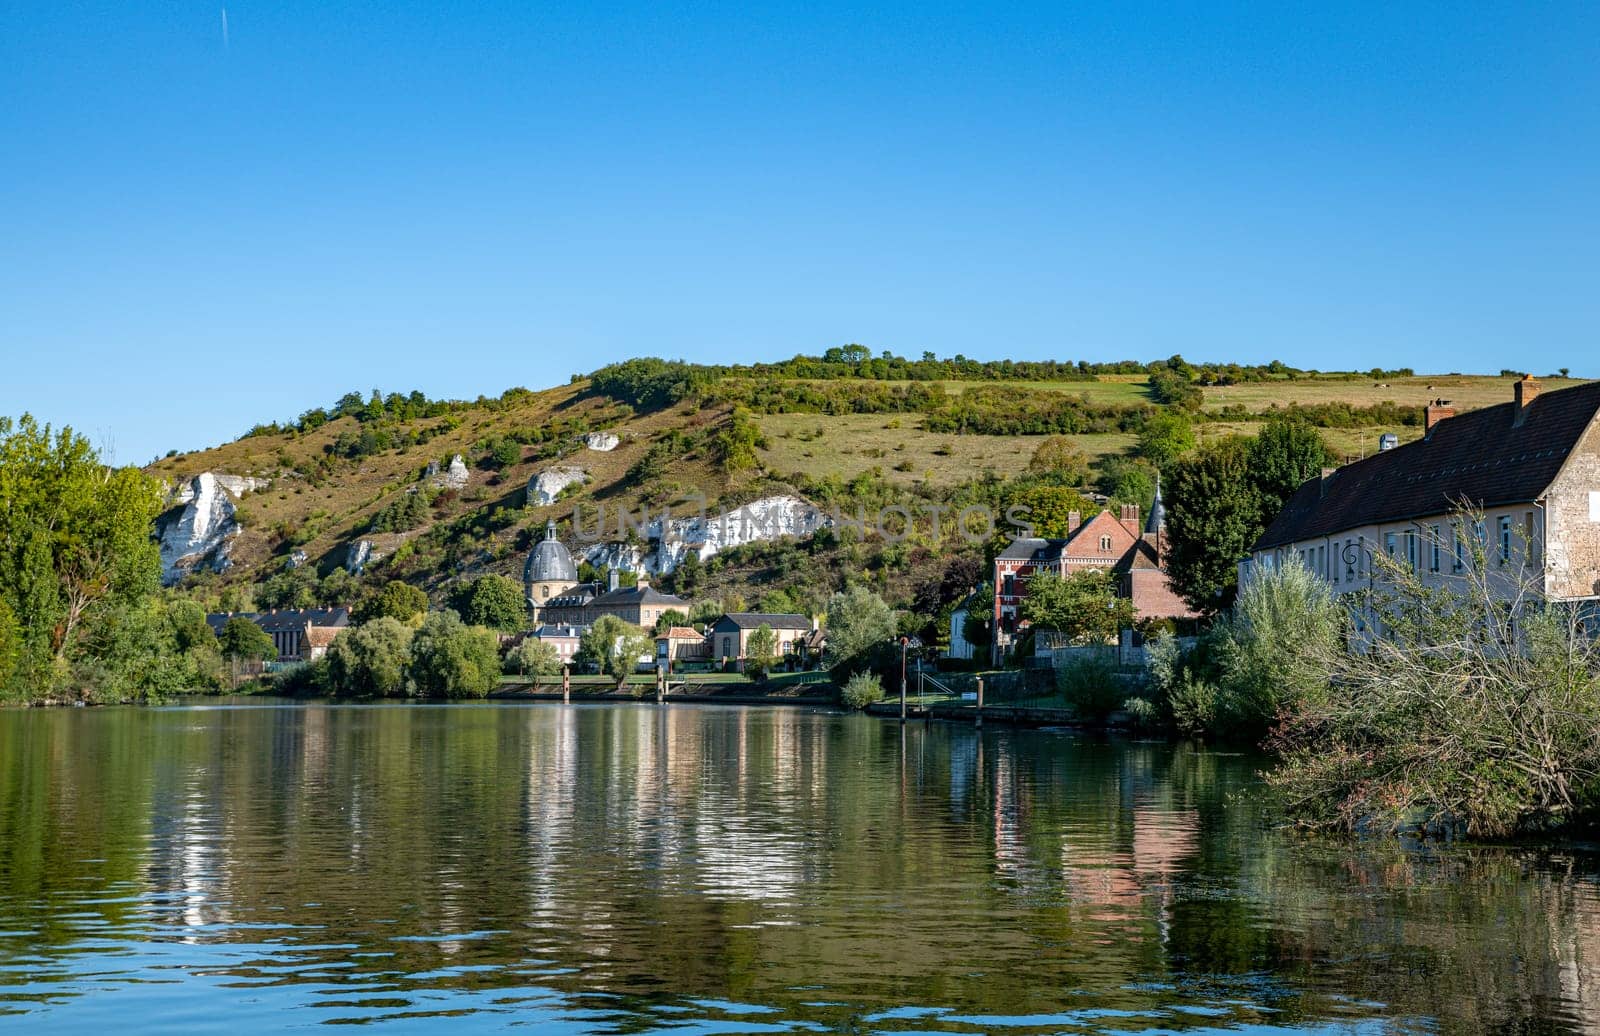 The village of les andelys in france with teh river seine and the rocks and nature on th background with houses and the church